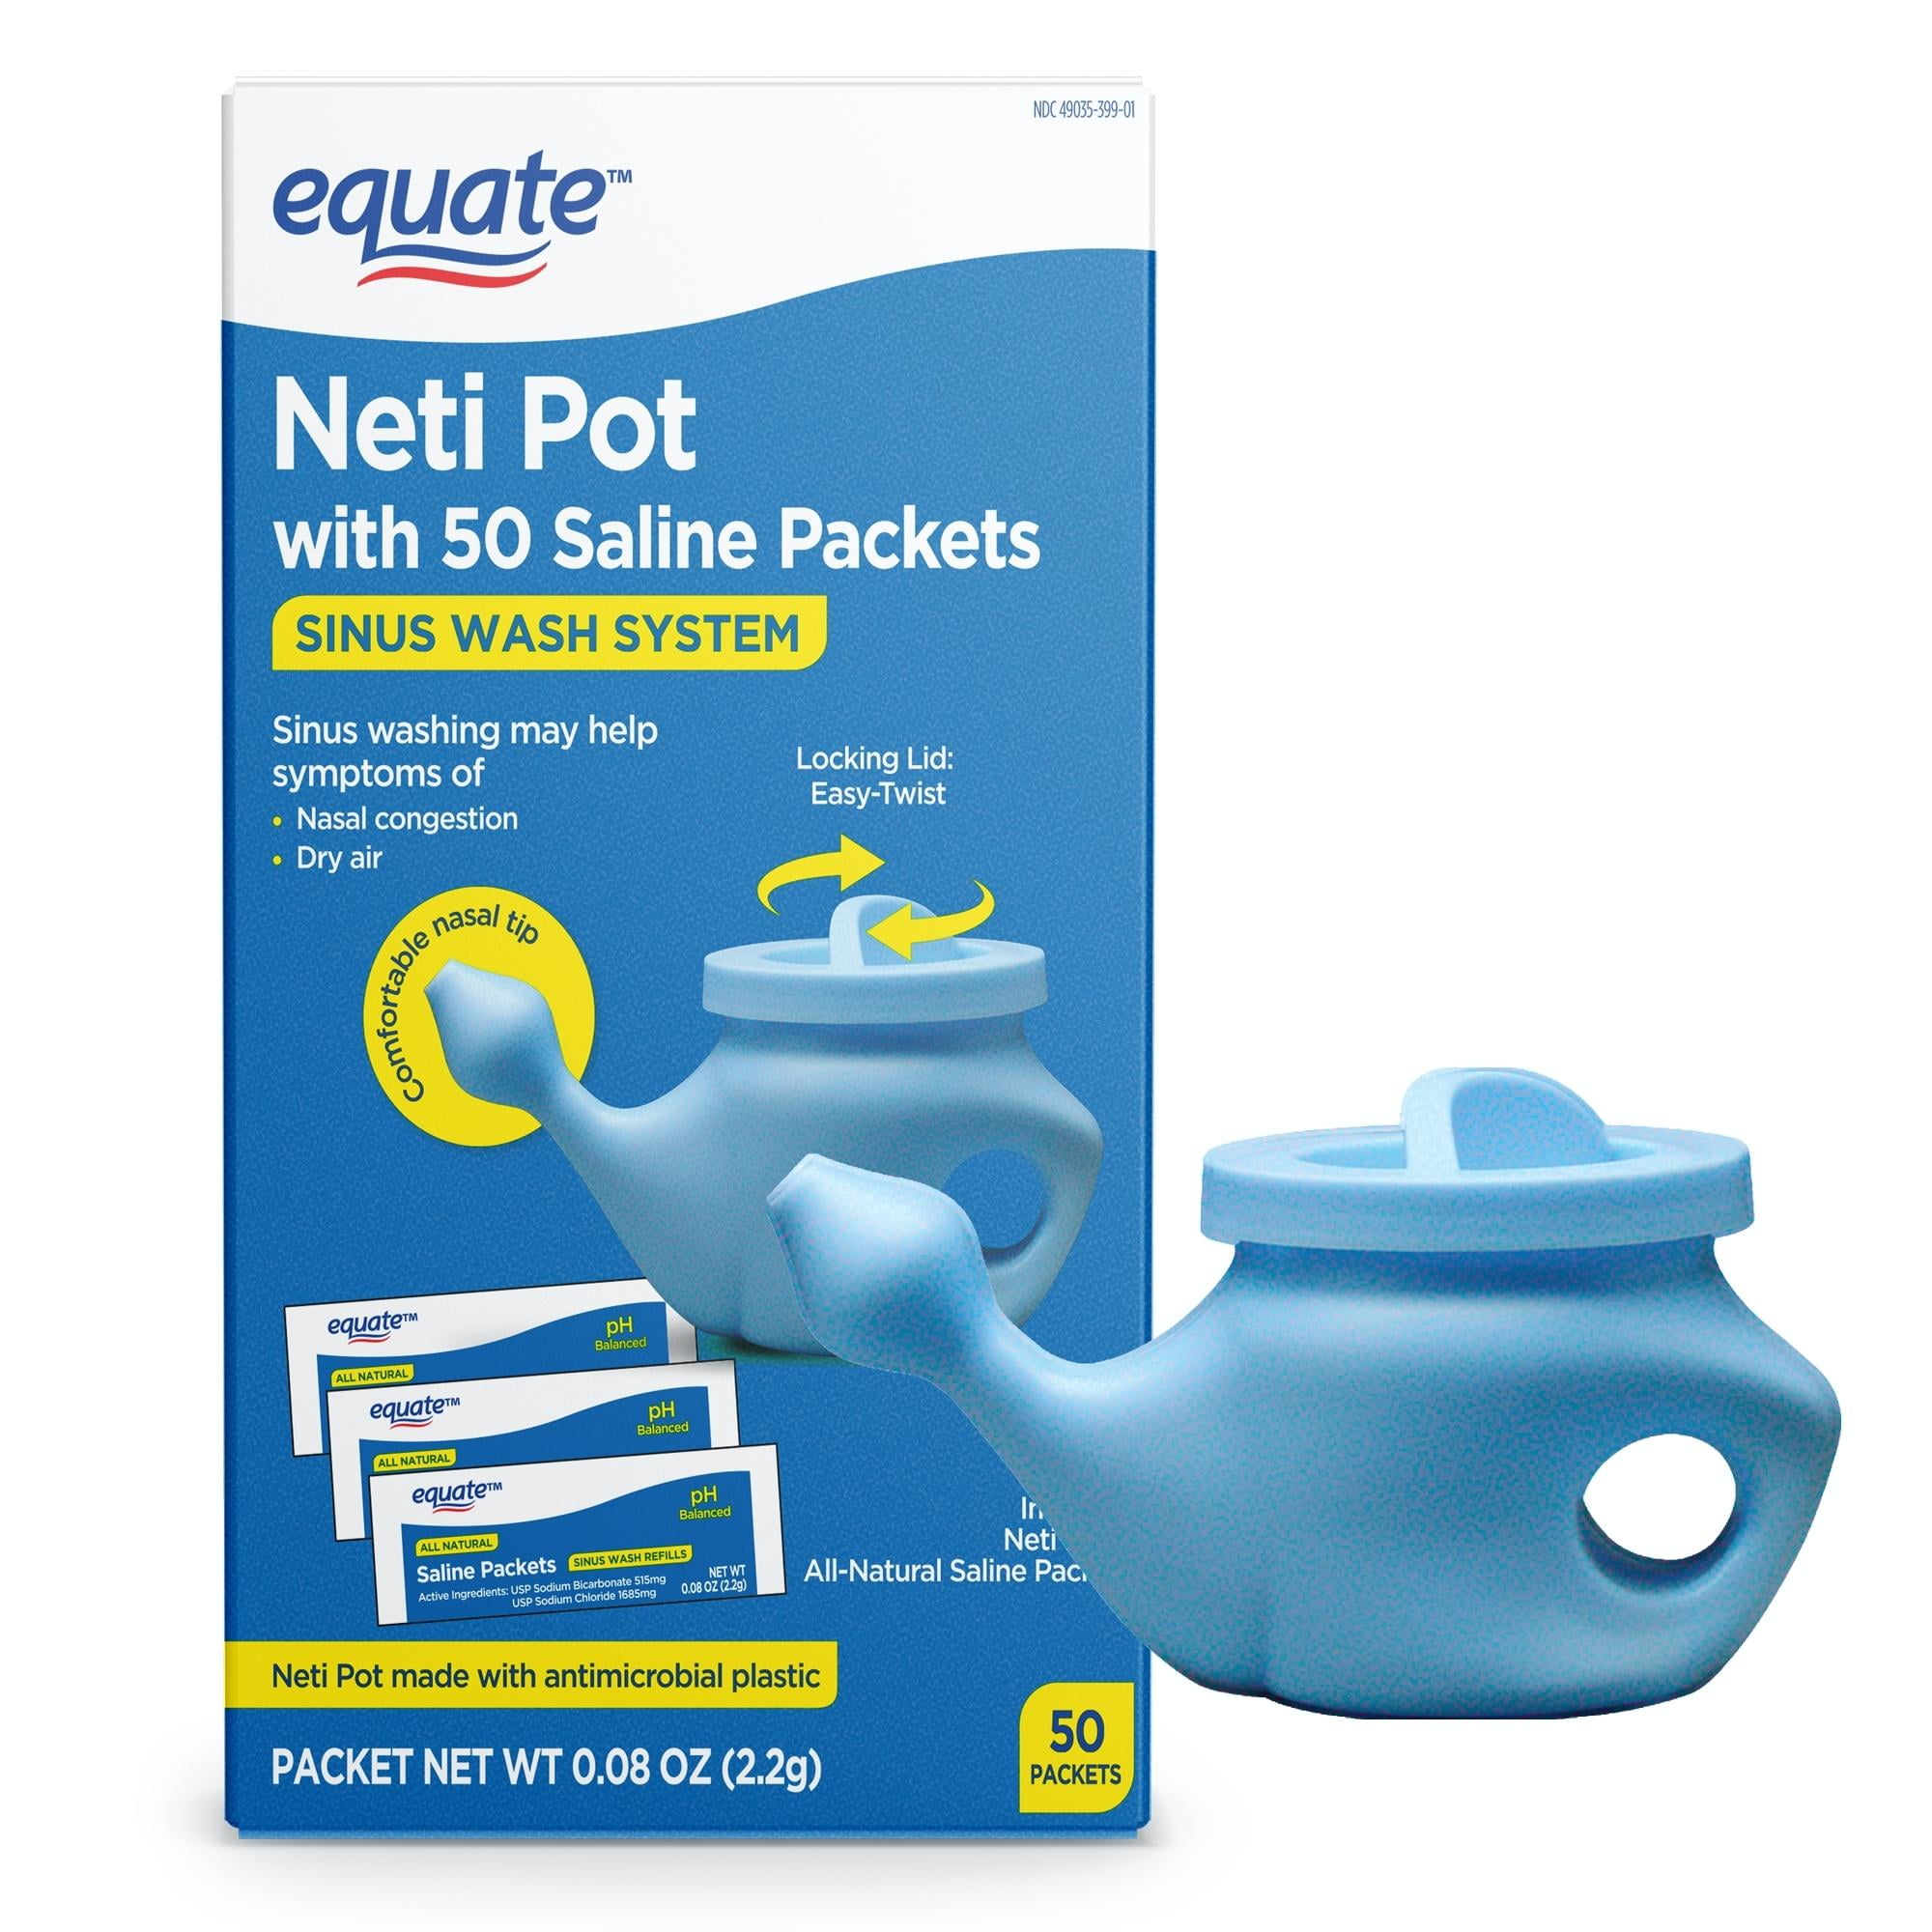 The Dos and Don'ts of Using Neti Pots and Sinus Rinses